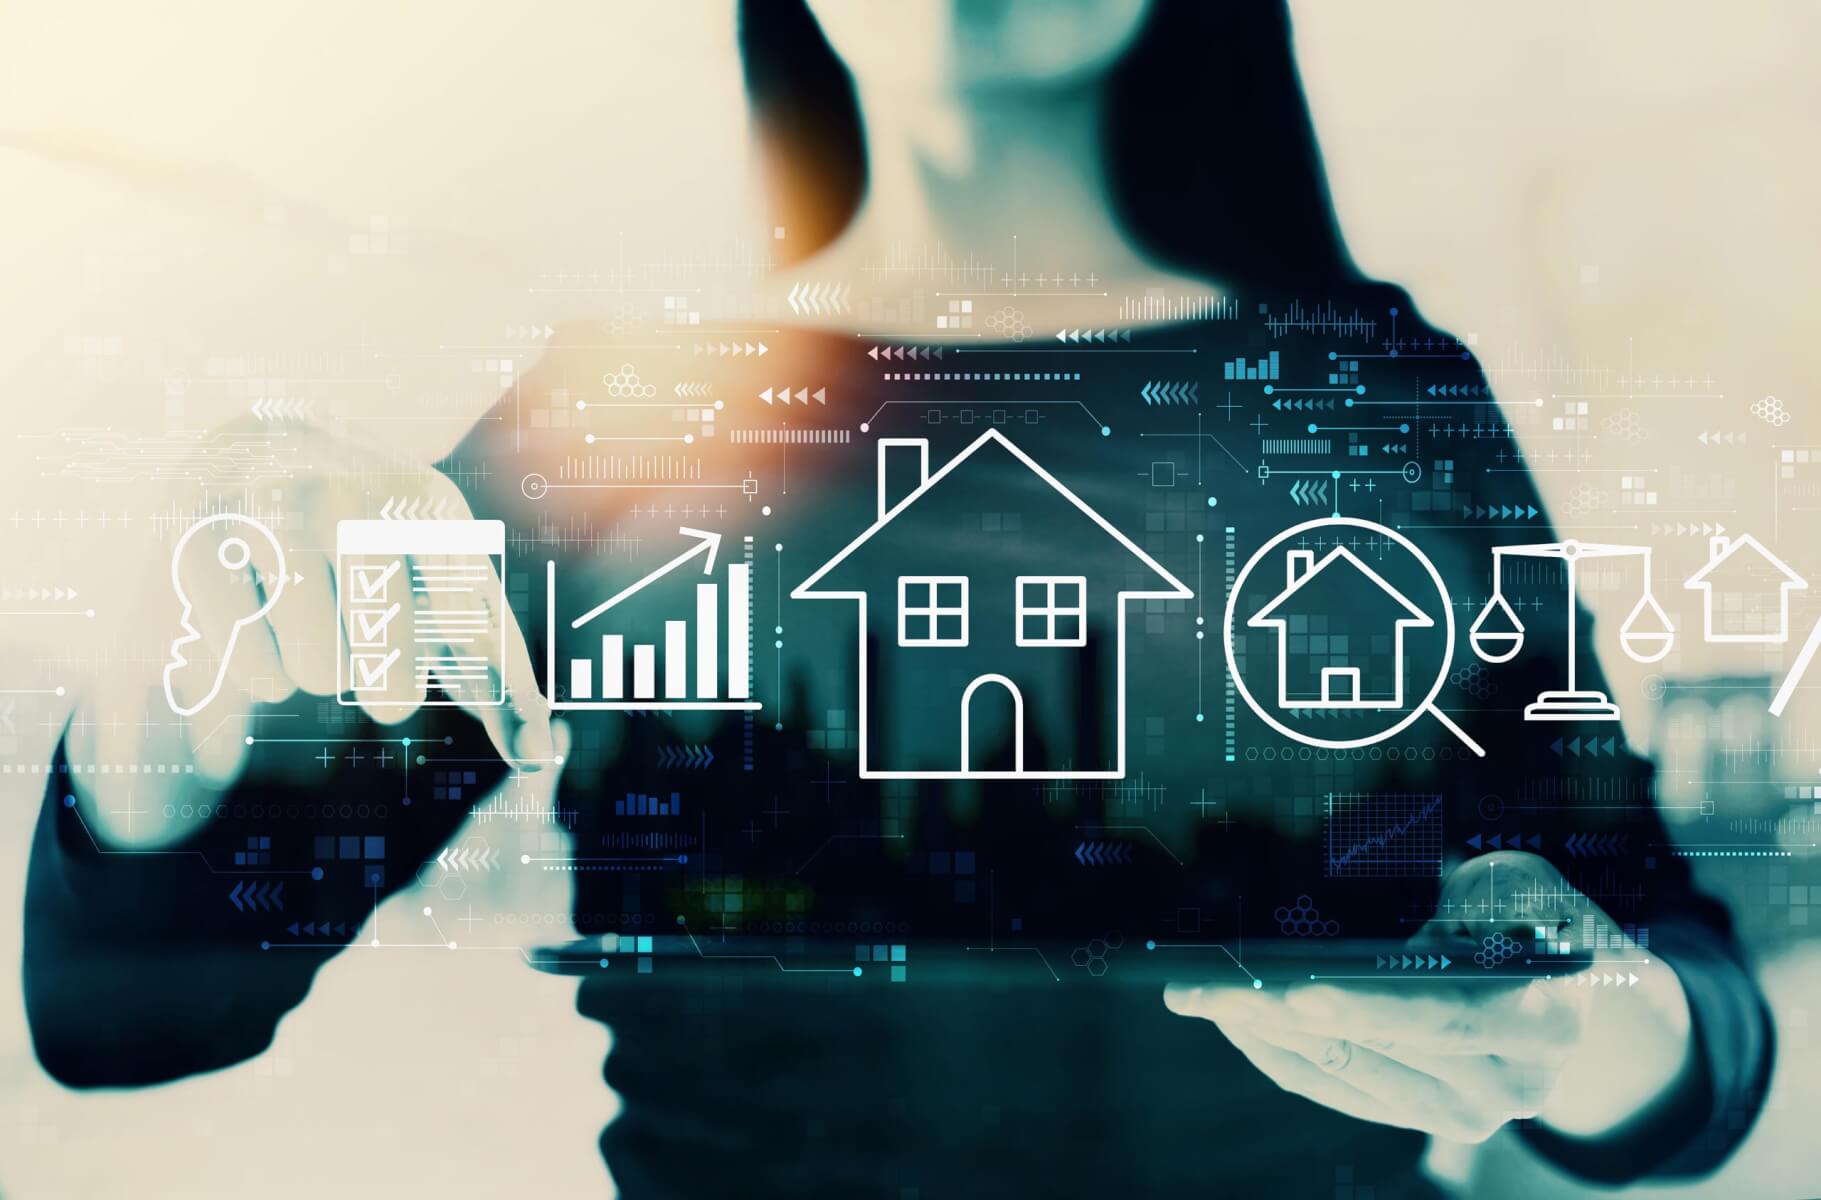 We Buy, You Buy, iBuy: PropTech Finds Its Place in Traditional Real Estate